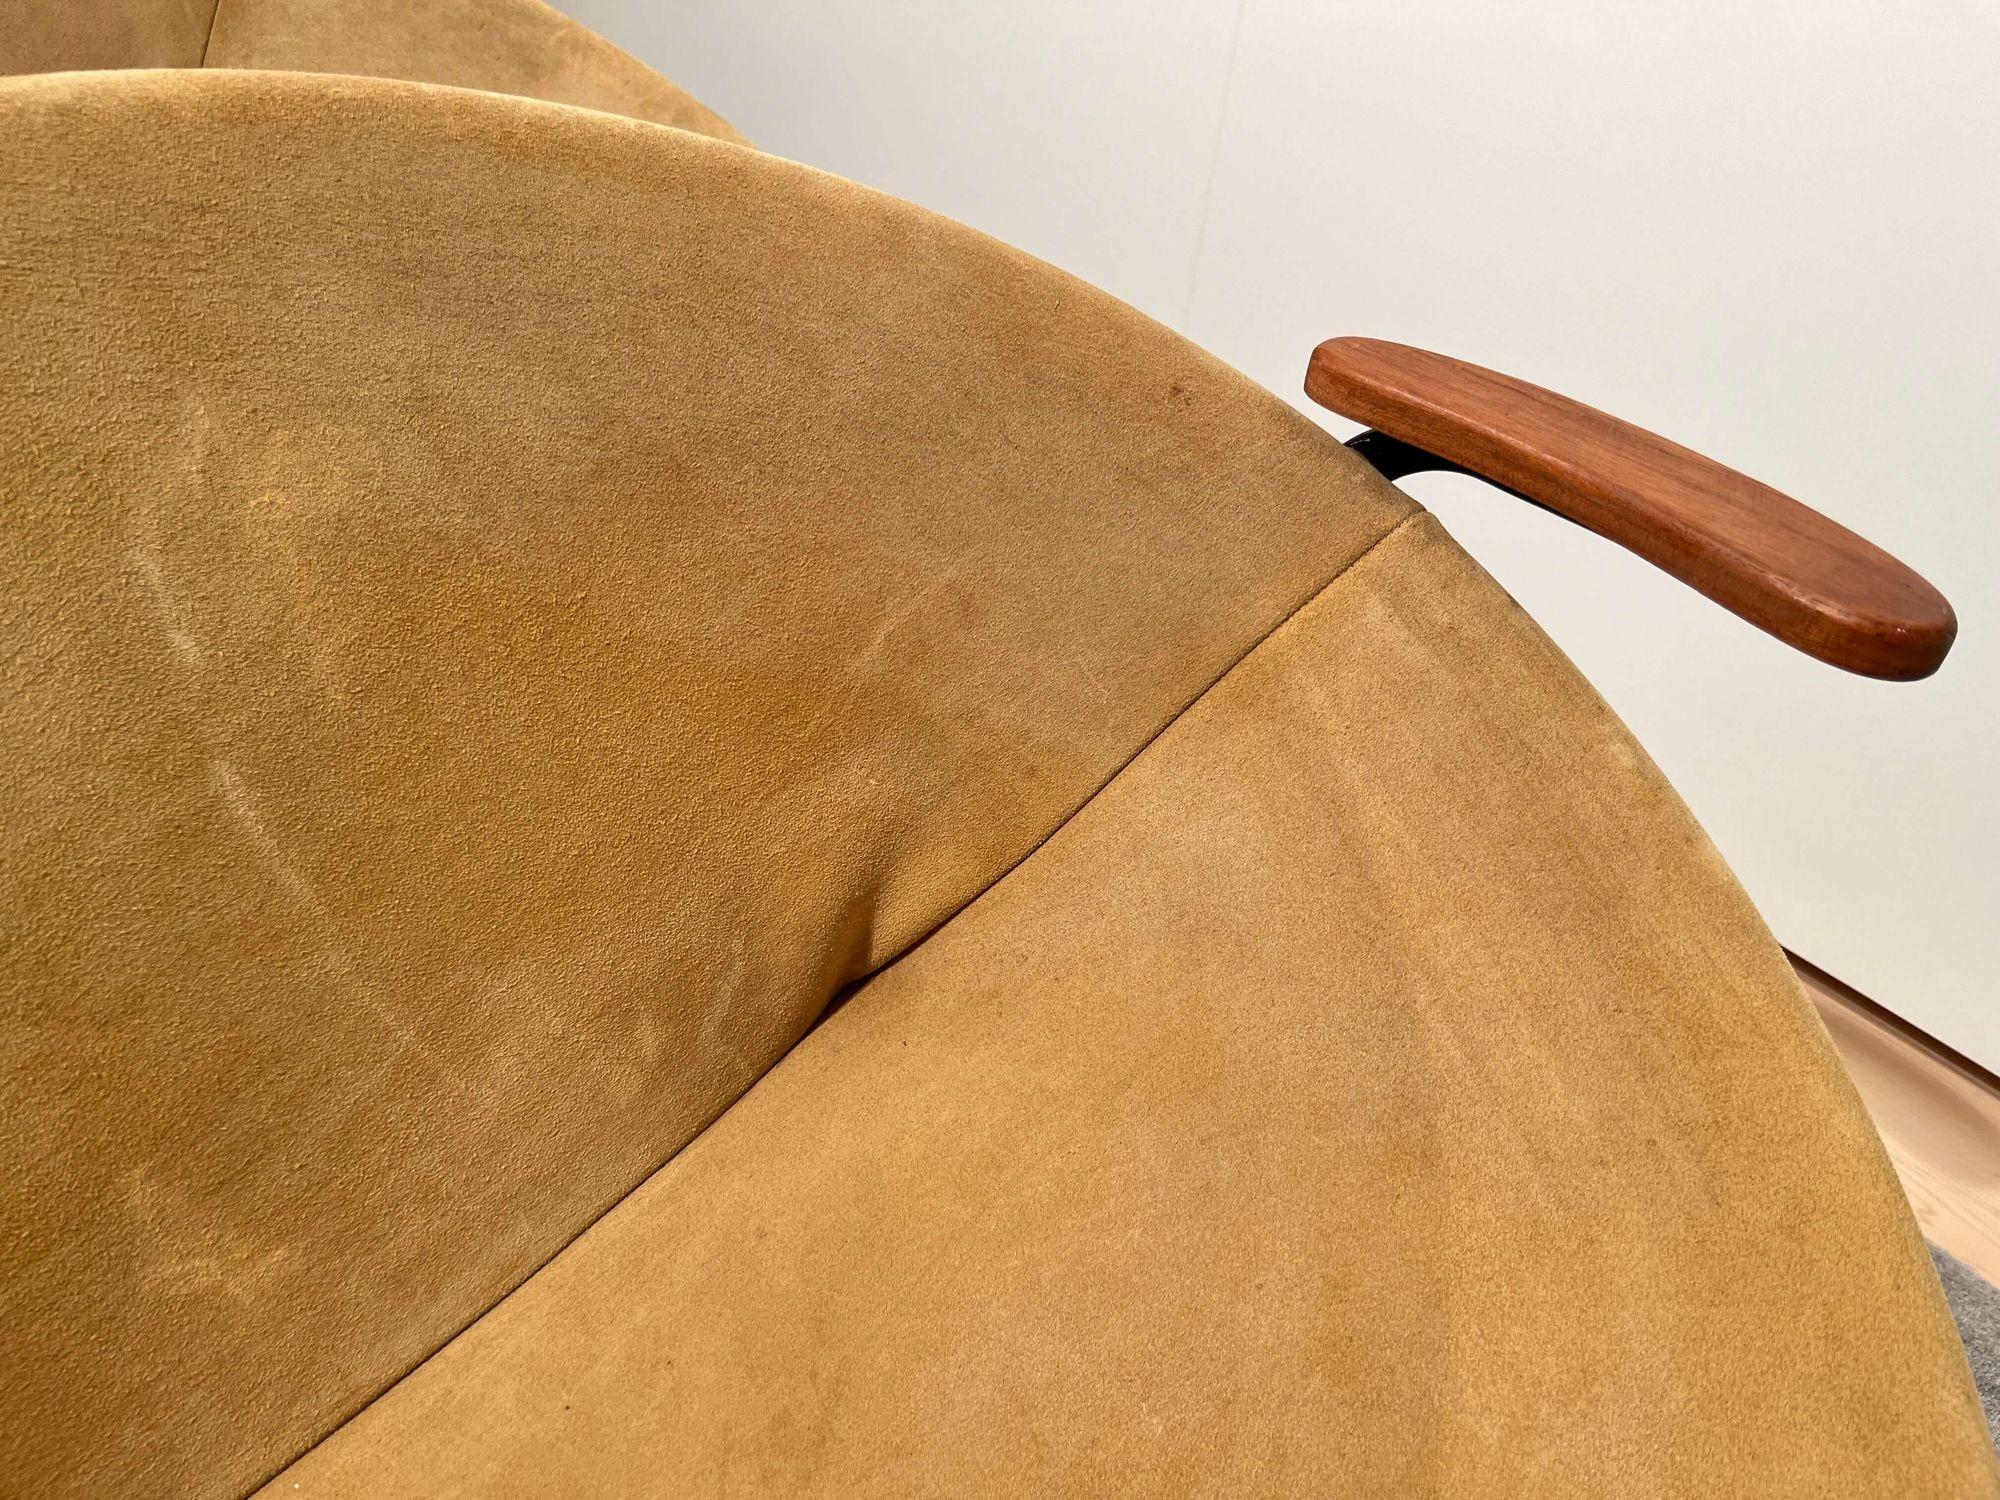 Pair of ‚Balloon’ Lounge Chairs by Hans Olsen, Yellow Suede, Denmark, circa 1960 For Sale 2